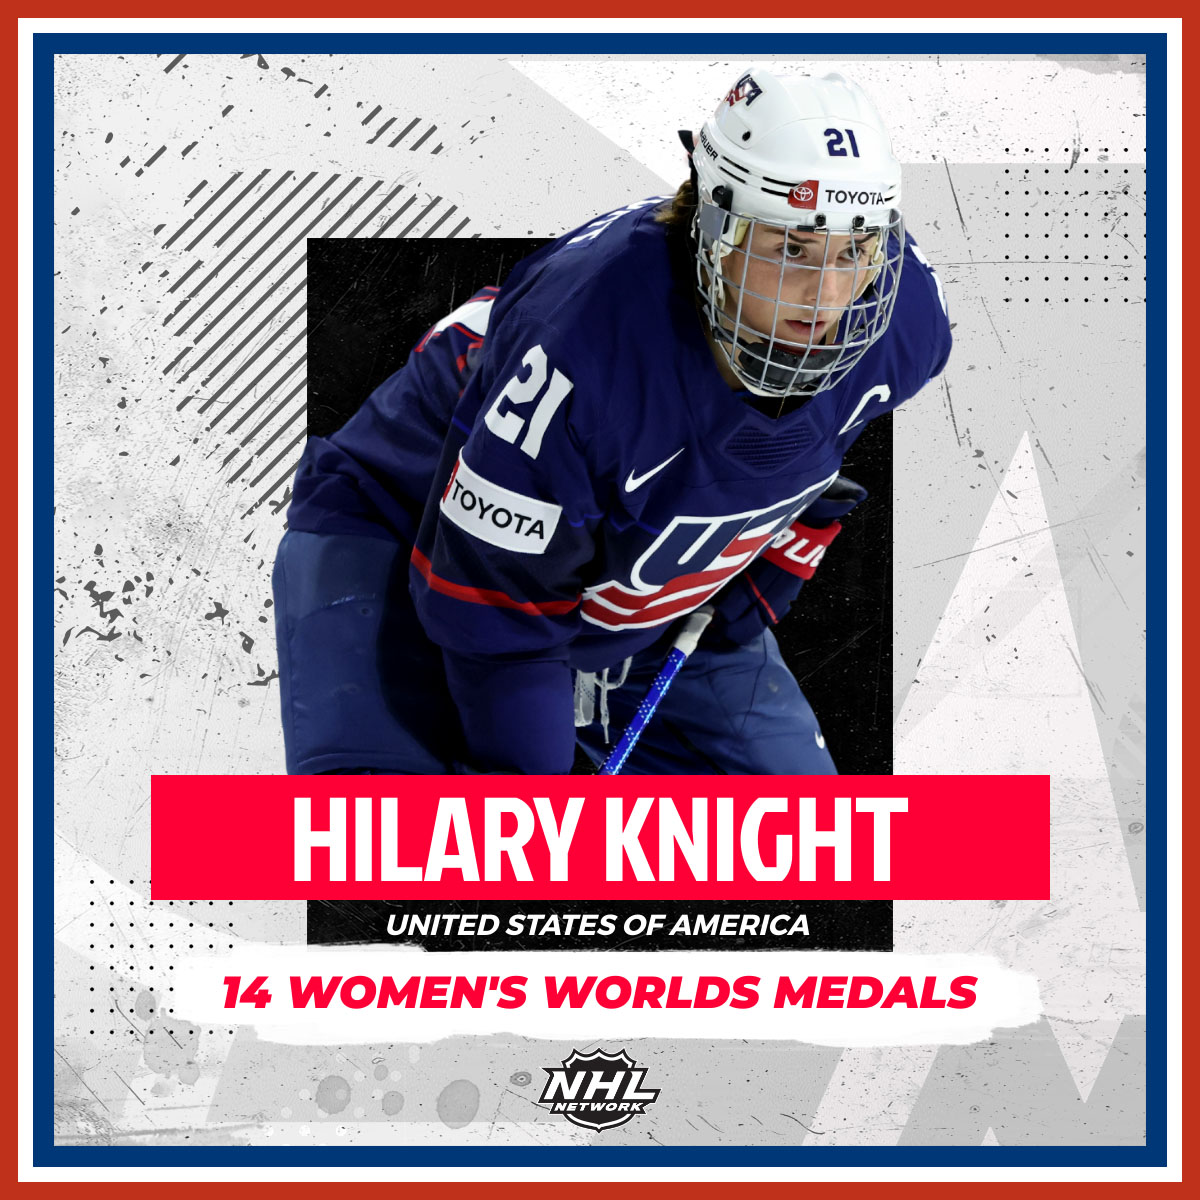 Hilary Knight picked up her 14th Women's World Championship medal, passing Hayley Wickenheiser for the most all-time! 👏 @usahockey | #WomensWorlds